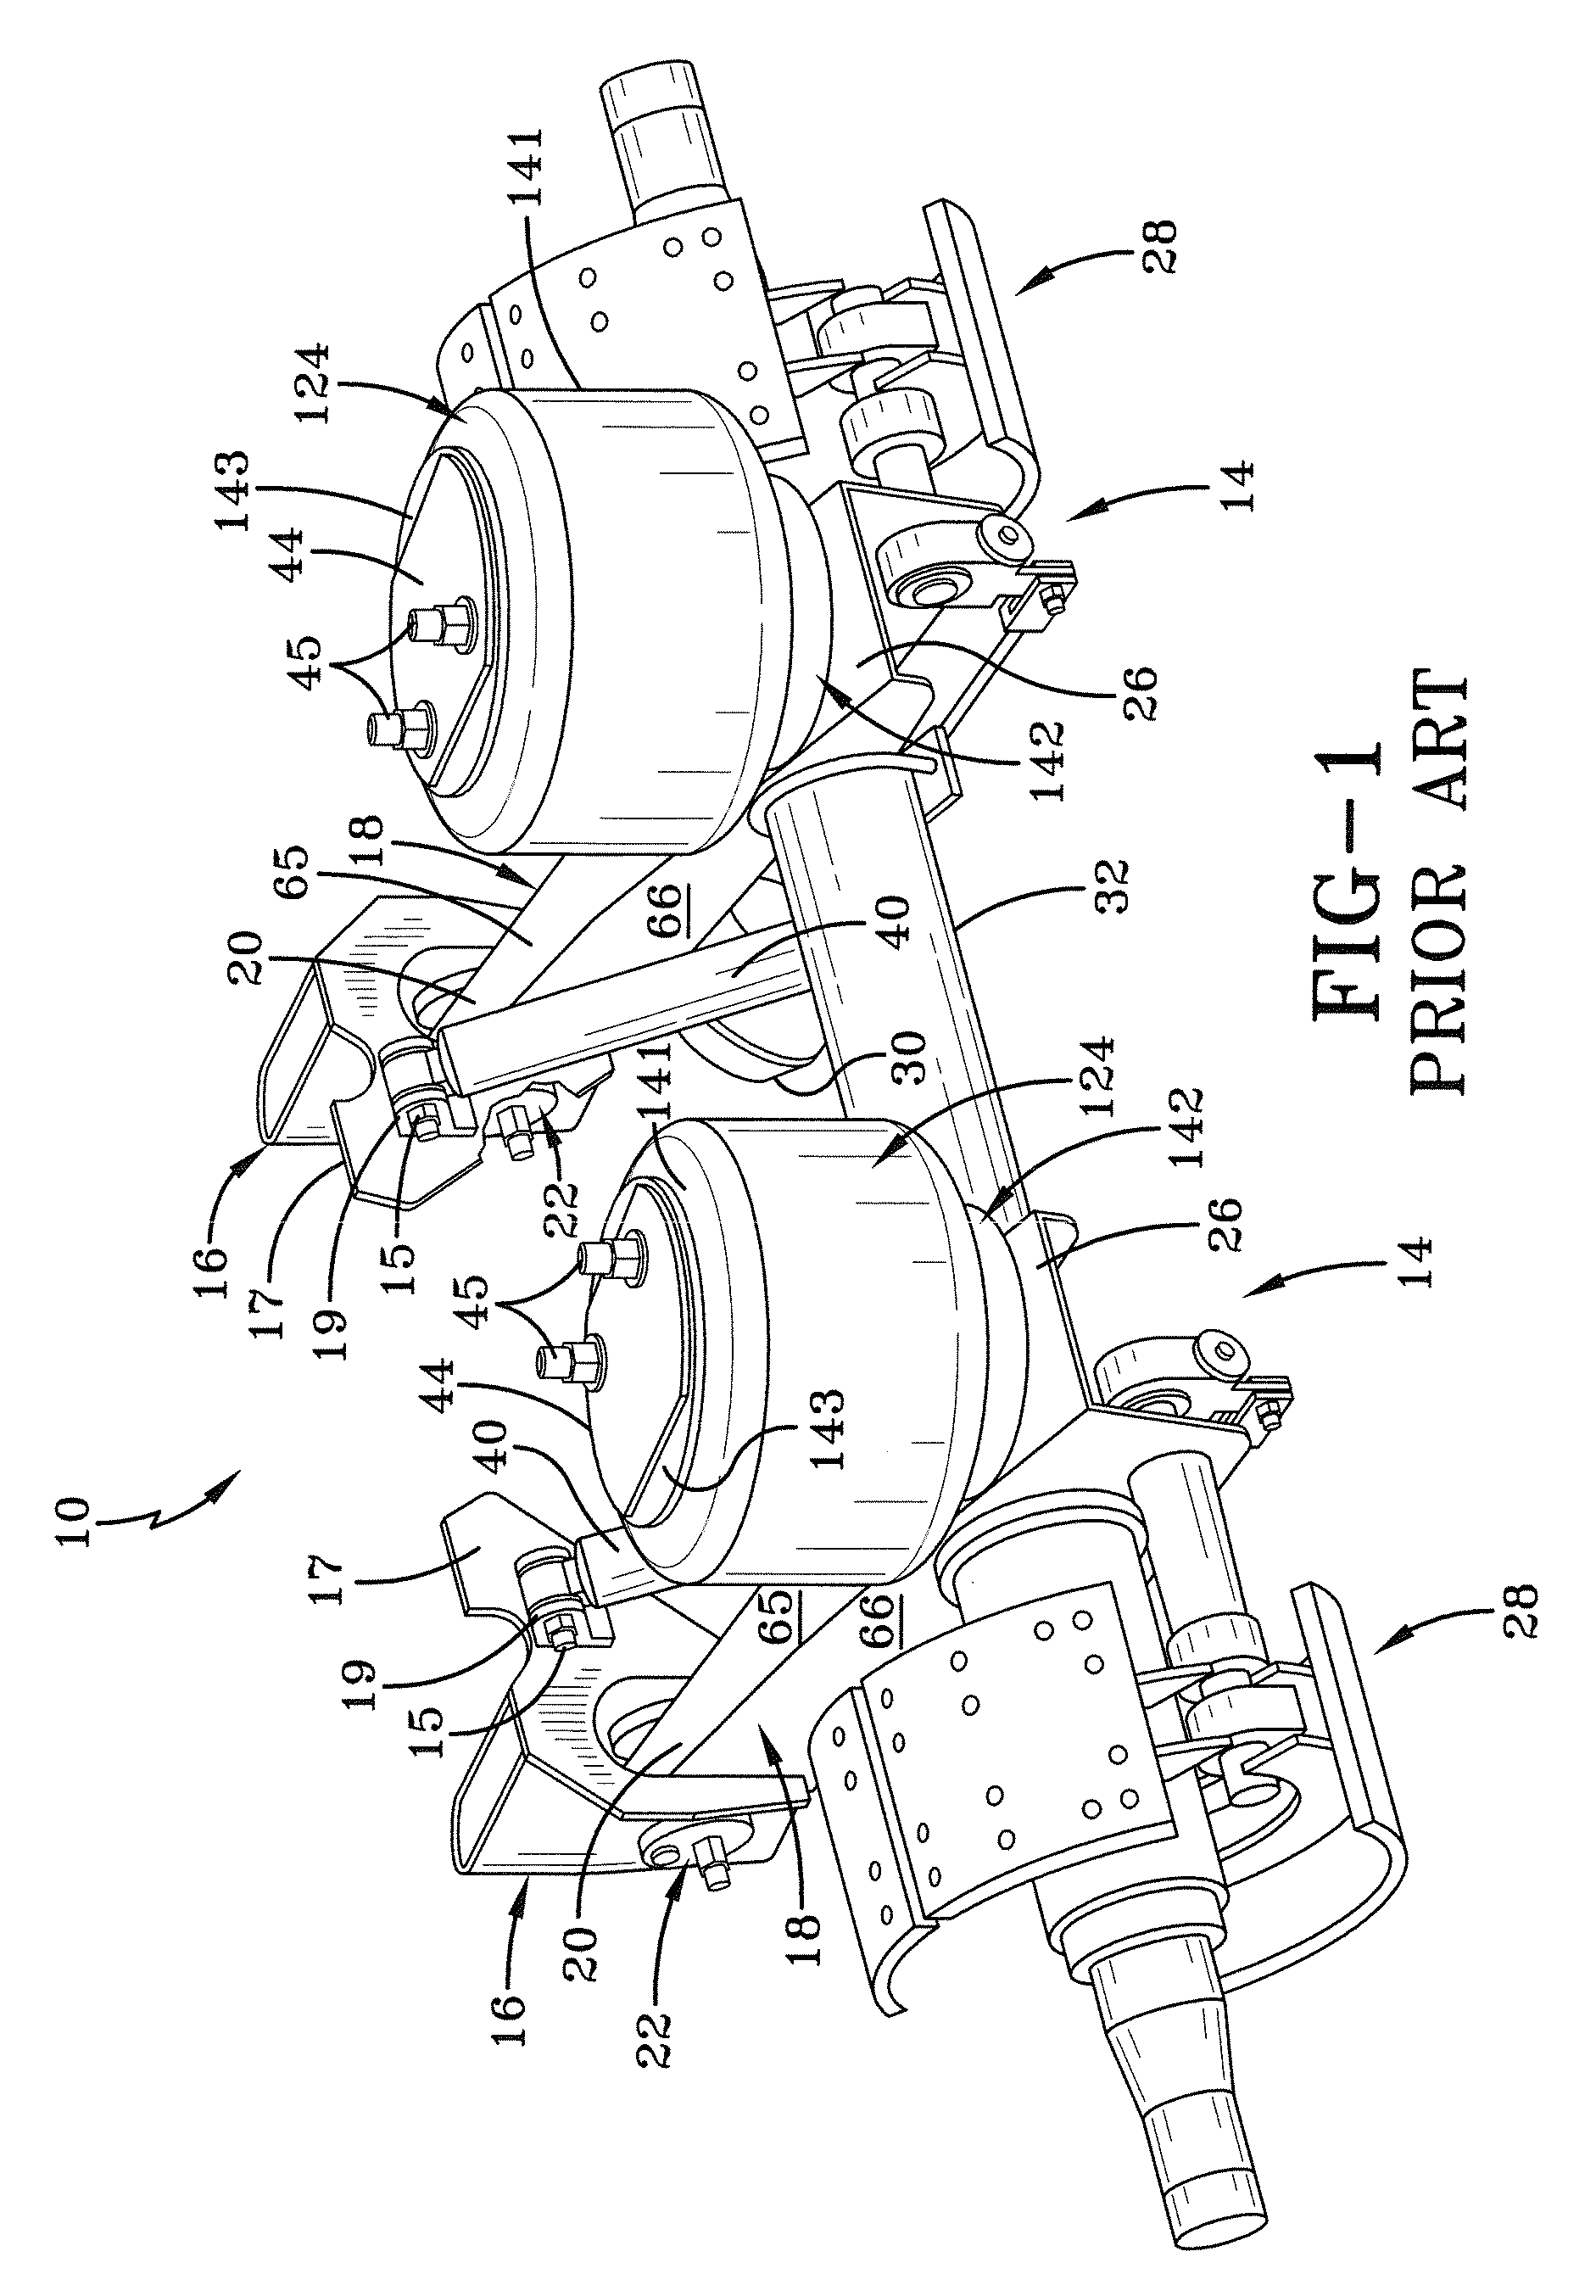 Piston for an air spring of a heavy-duty vehicle